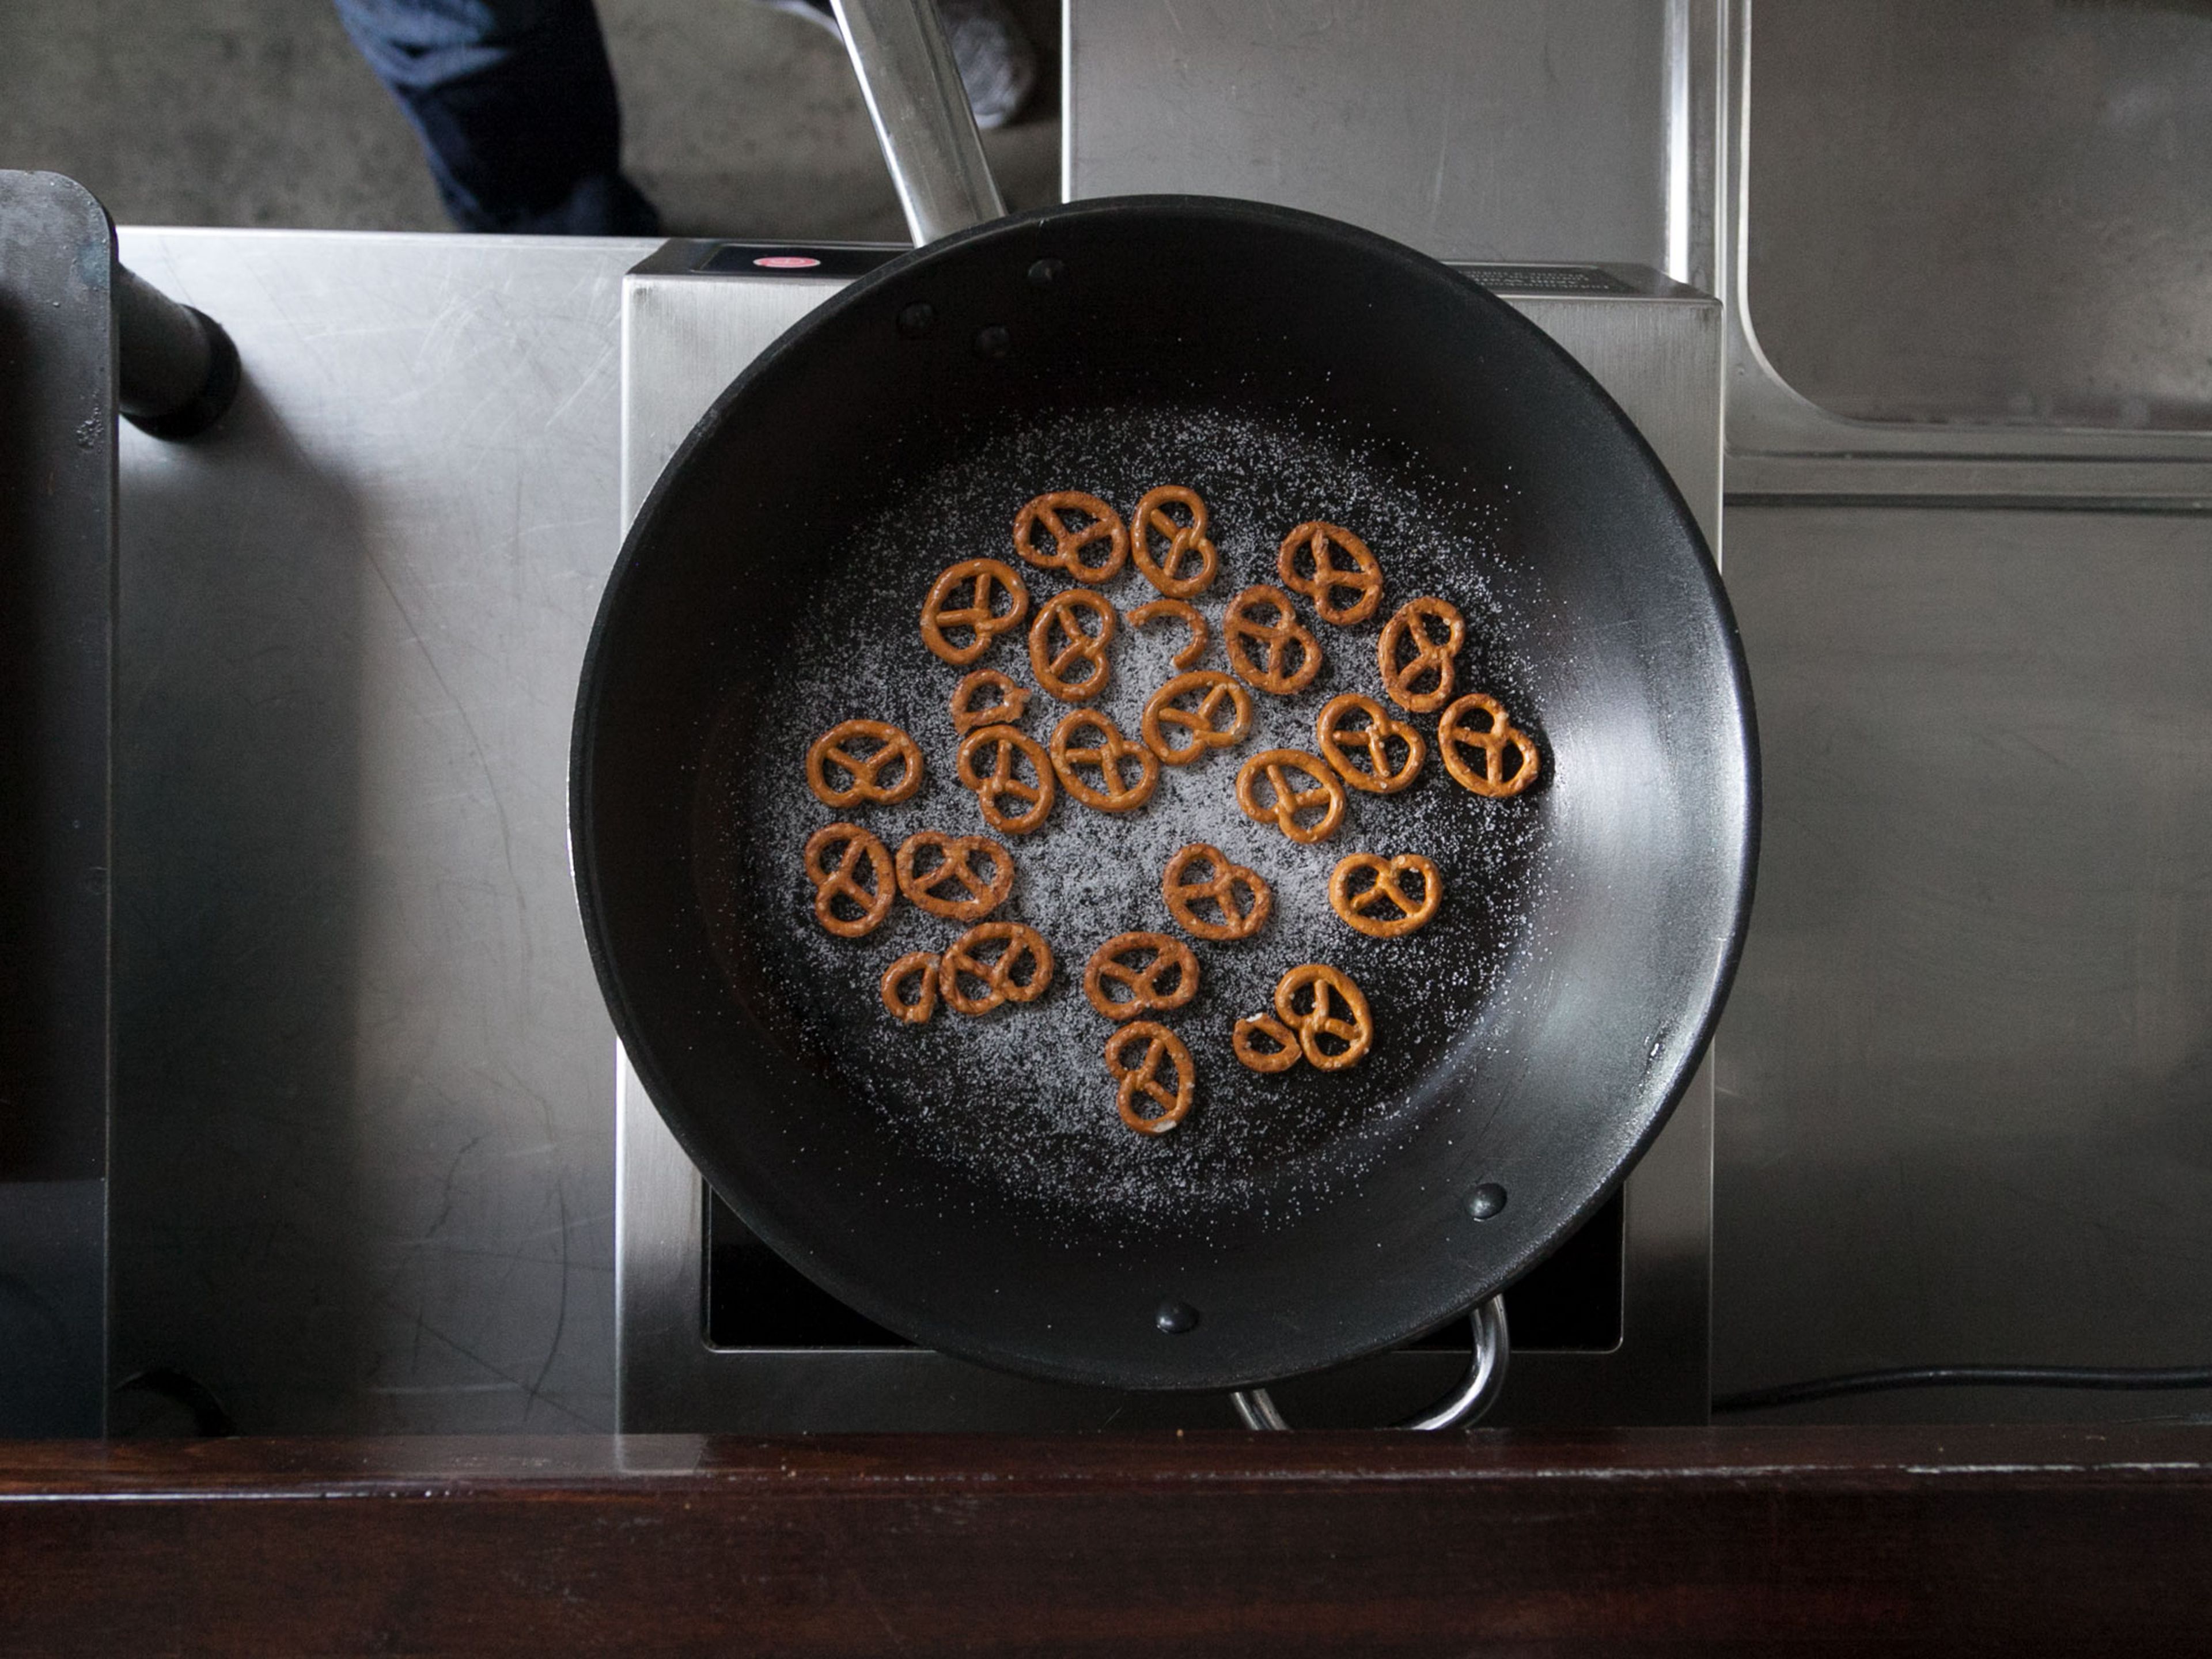 In a nonstick pan, caramelize salty pretzels with sugar over medium heat; be careful not to let sugar burn. Remove from heat and let cool. Remove caramelized pretzels from pan and roughly chop.